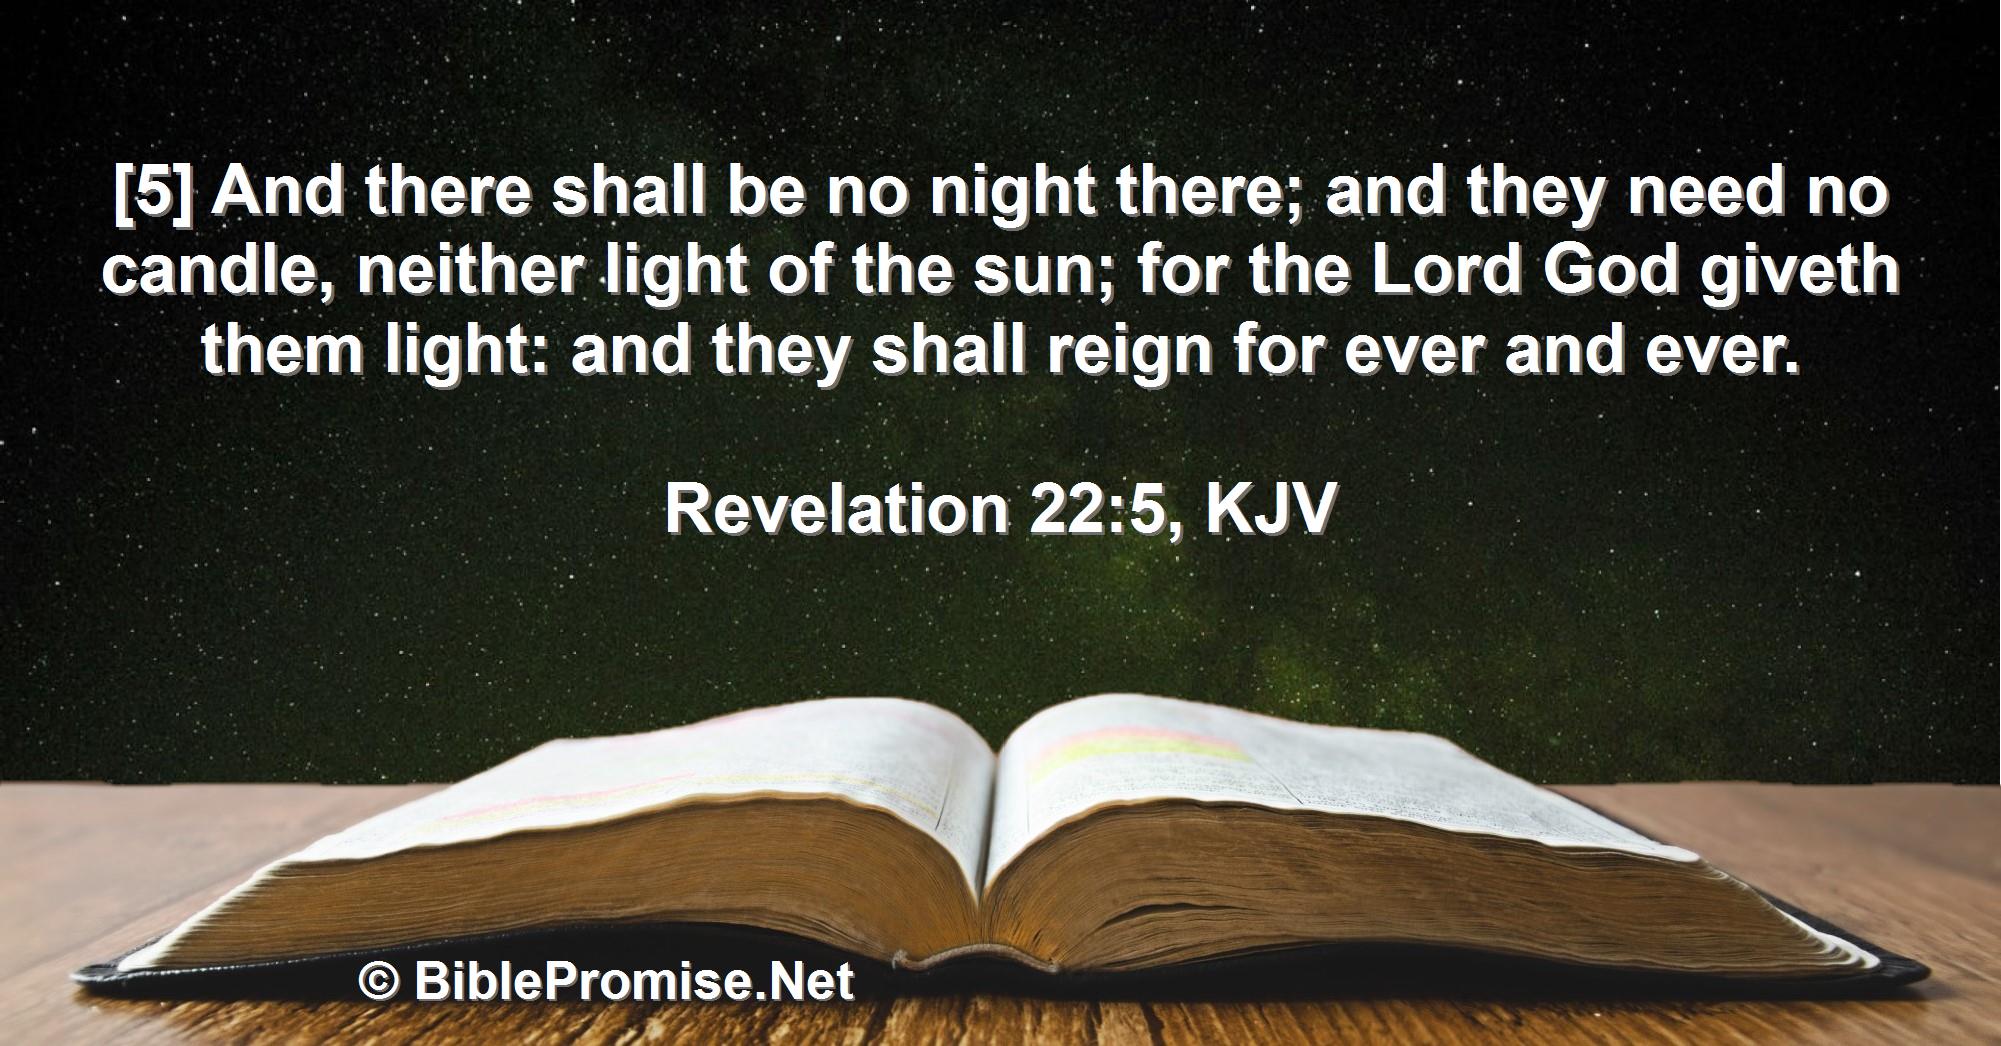 Wednesday, August 3, 2022 - Revelation 22:5 (KJV) - Bible promise that God's people shall reign for ever and ever.